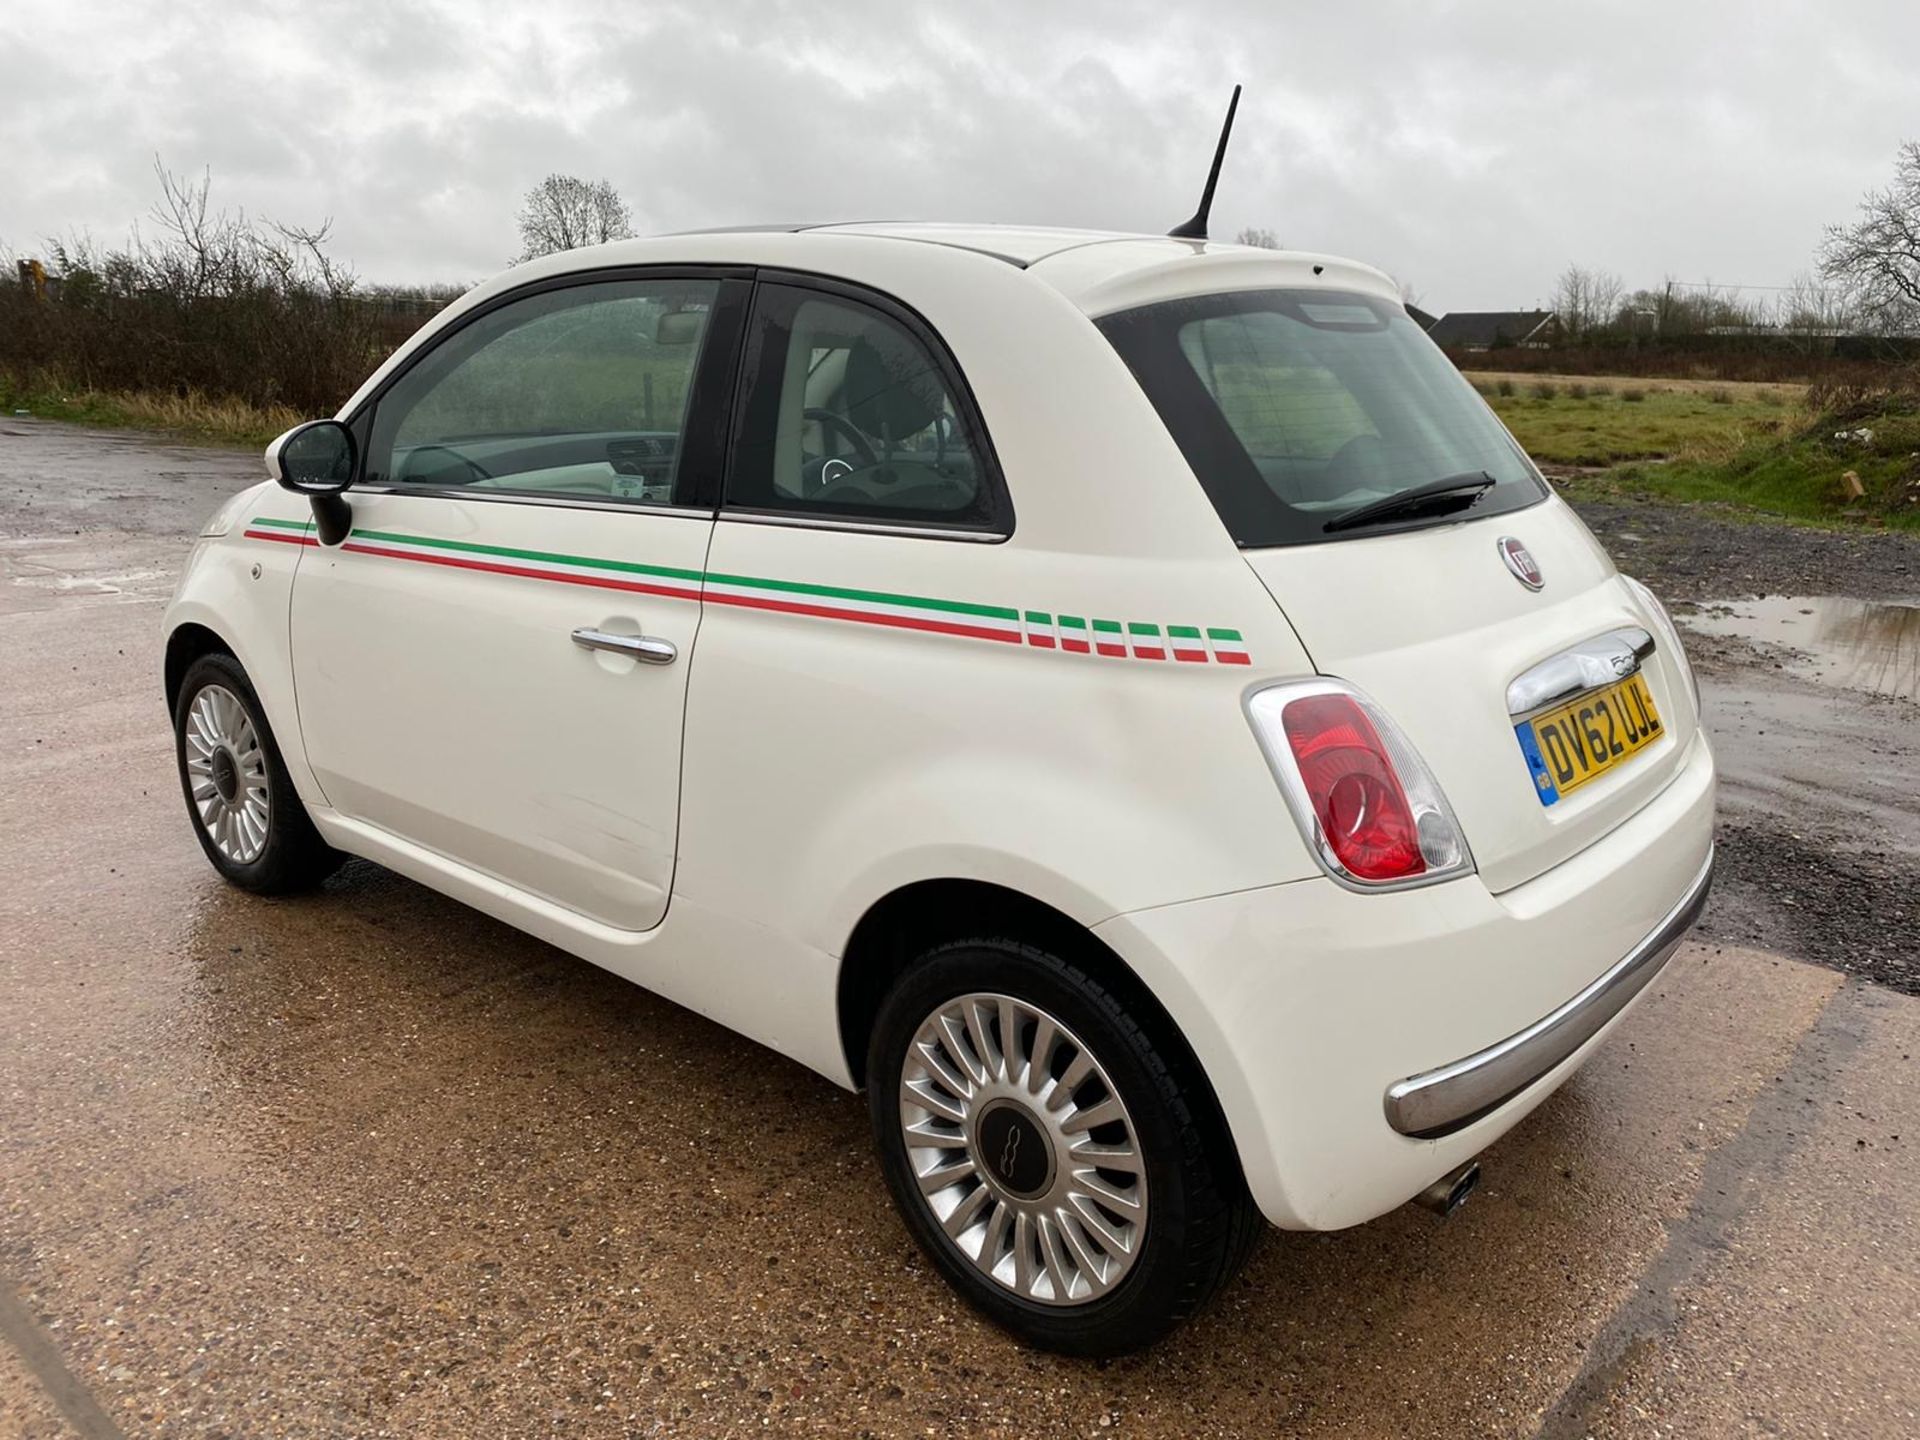 (ON SALE) FIAT 500 1.2 "LOUNGE" (START/STOP) 2013 MODEL - LOW MILES - AIR CON -LOW MILES- NO VAT - Image 5 of 13